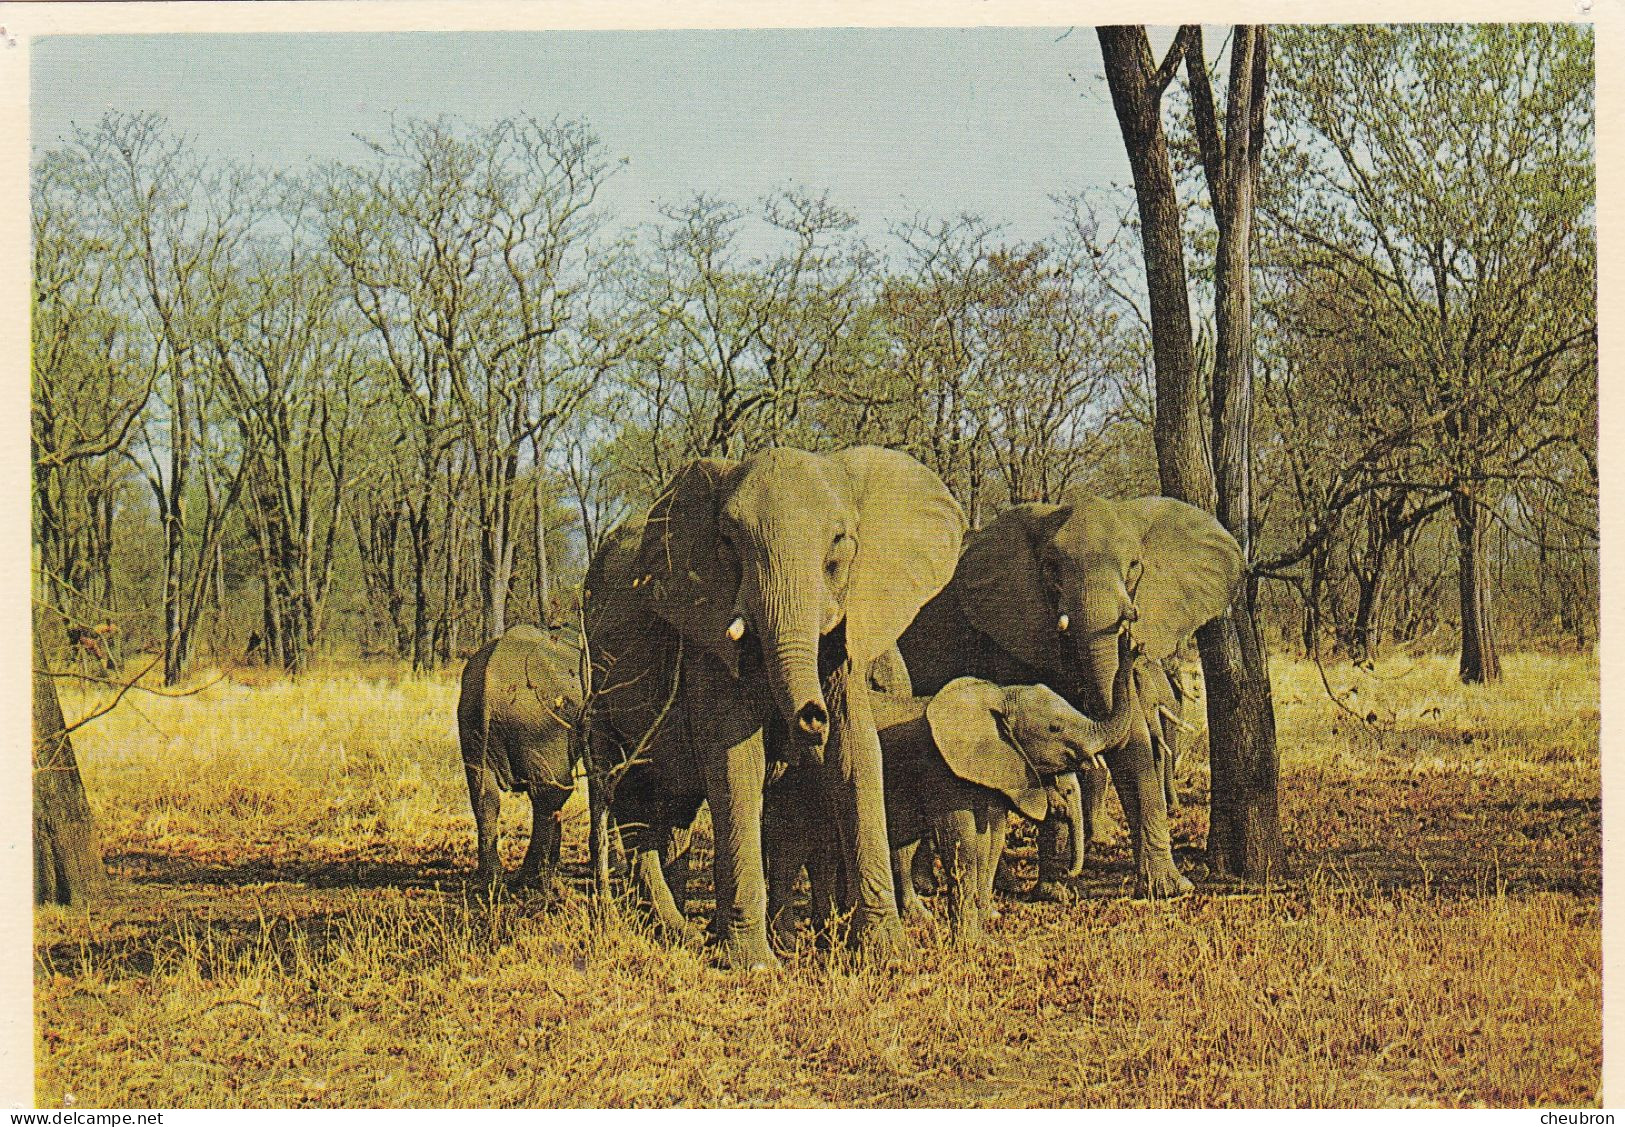 ANIMAUX & FAUNE.  CPSM. ELEPHANTS."HERD OF ELEPHANTS AND THEIR CALVES "  AFRIQUE DU SUD. NATURAL GAME RESERVES - Elefanten